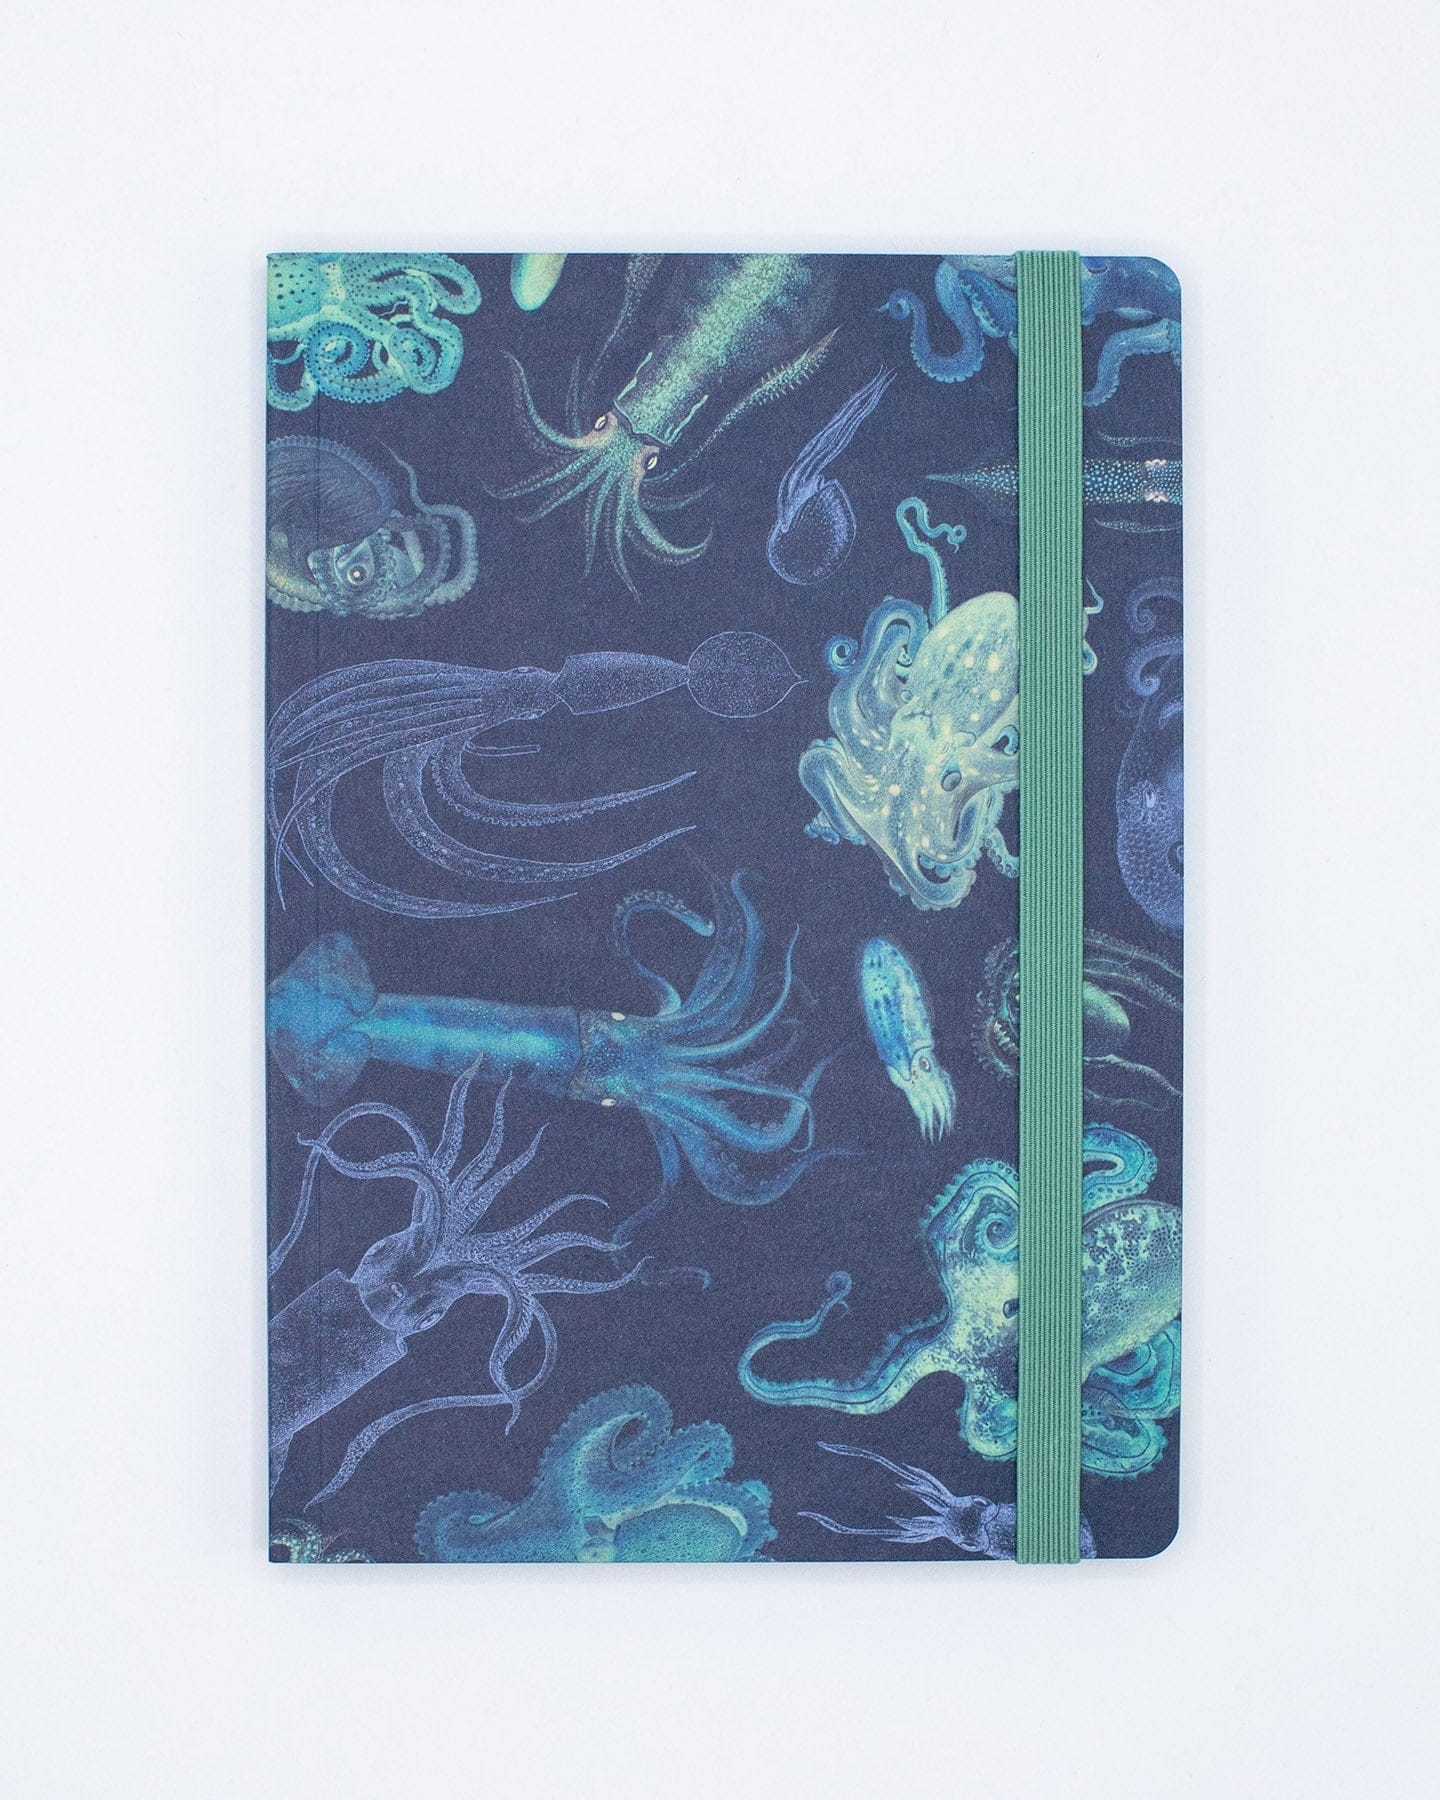 Sea Monsters: Octopus & Squid A5 Softcover Cognitive Surplus